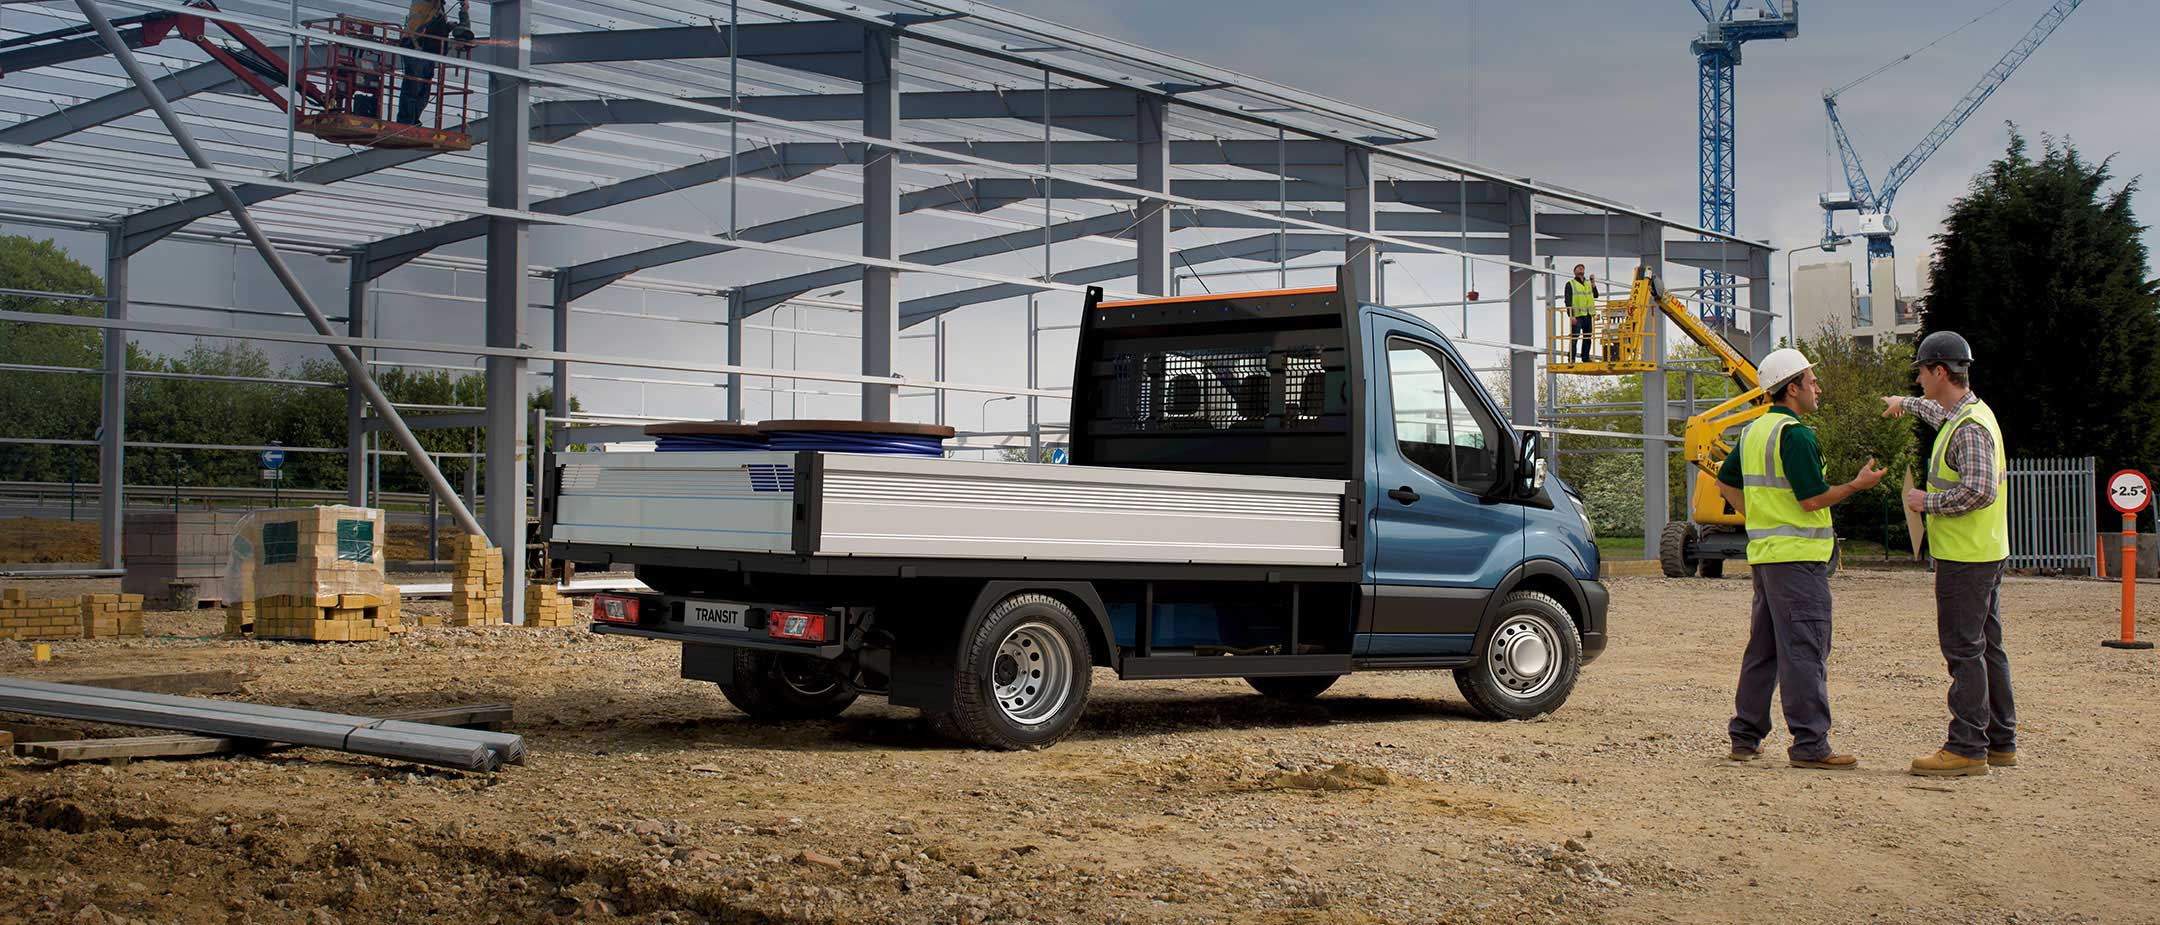 New Transit Chassis Cab parked in construction site